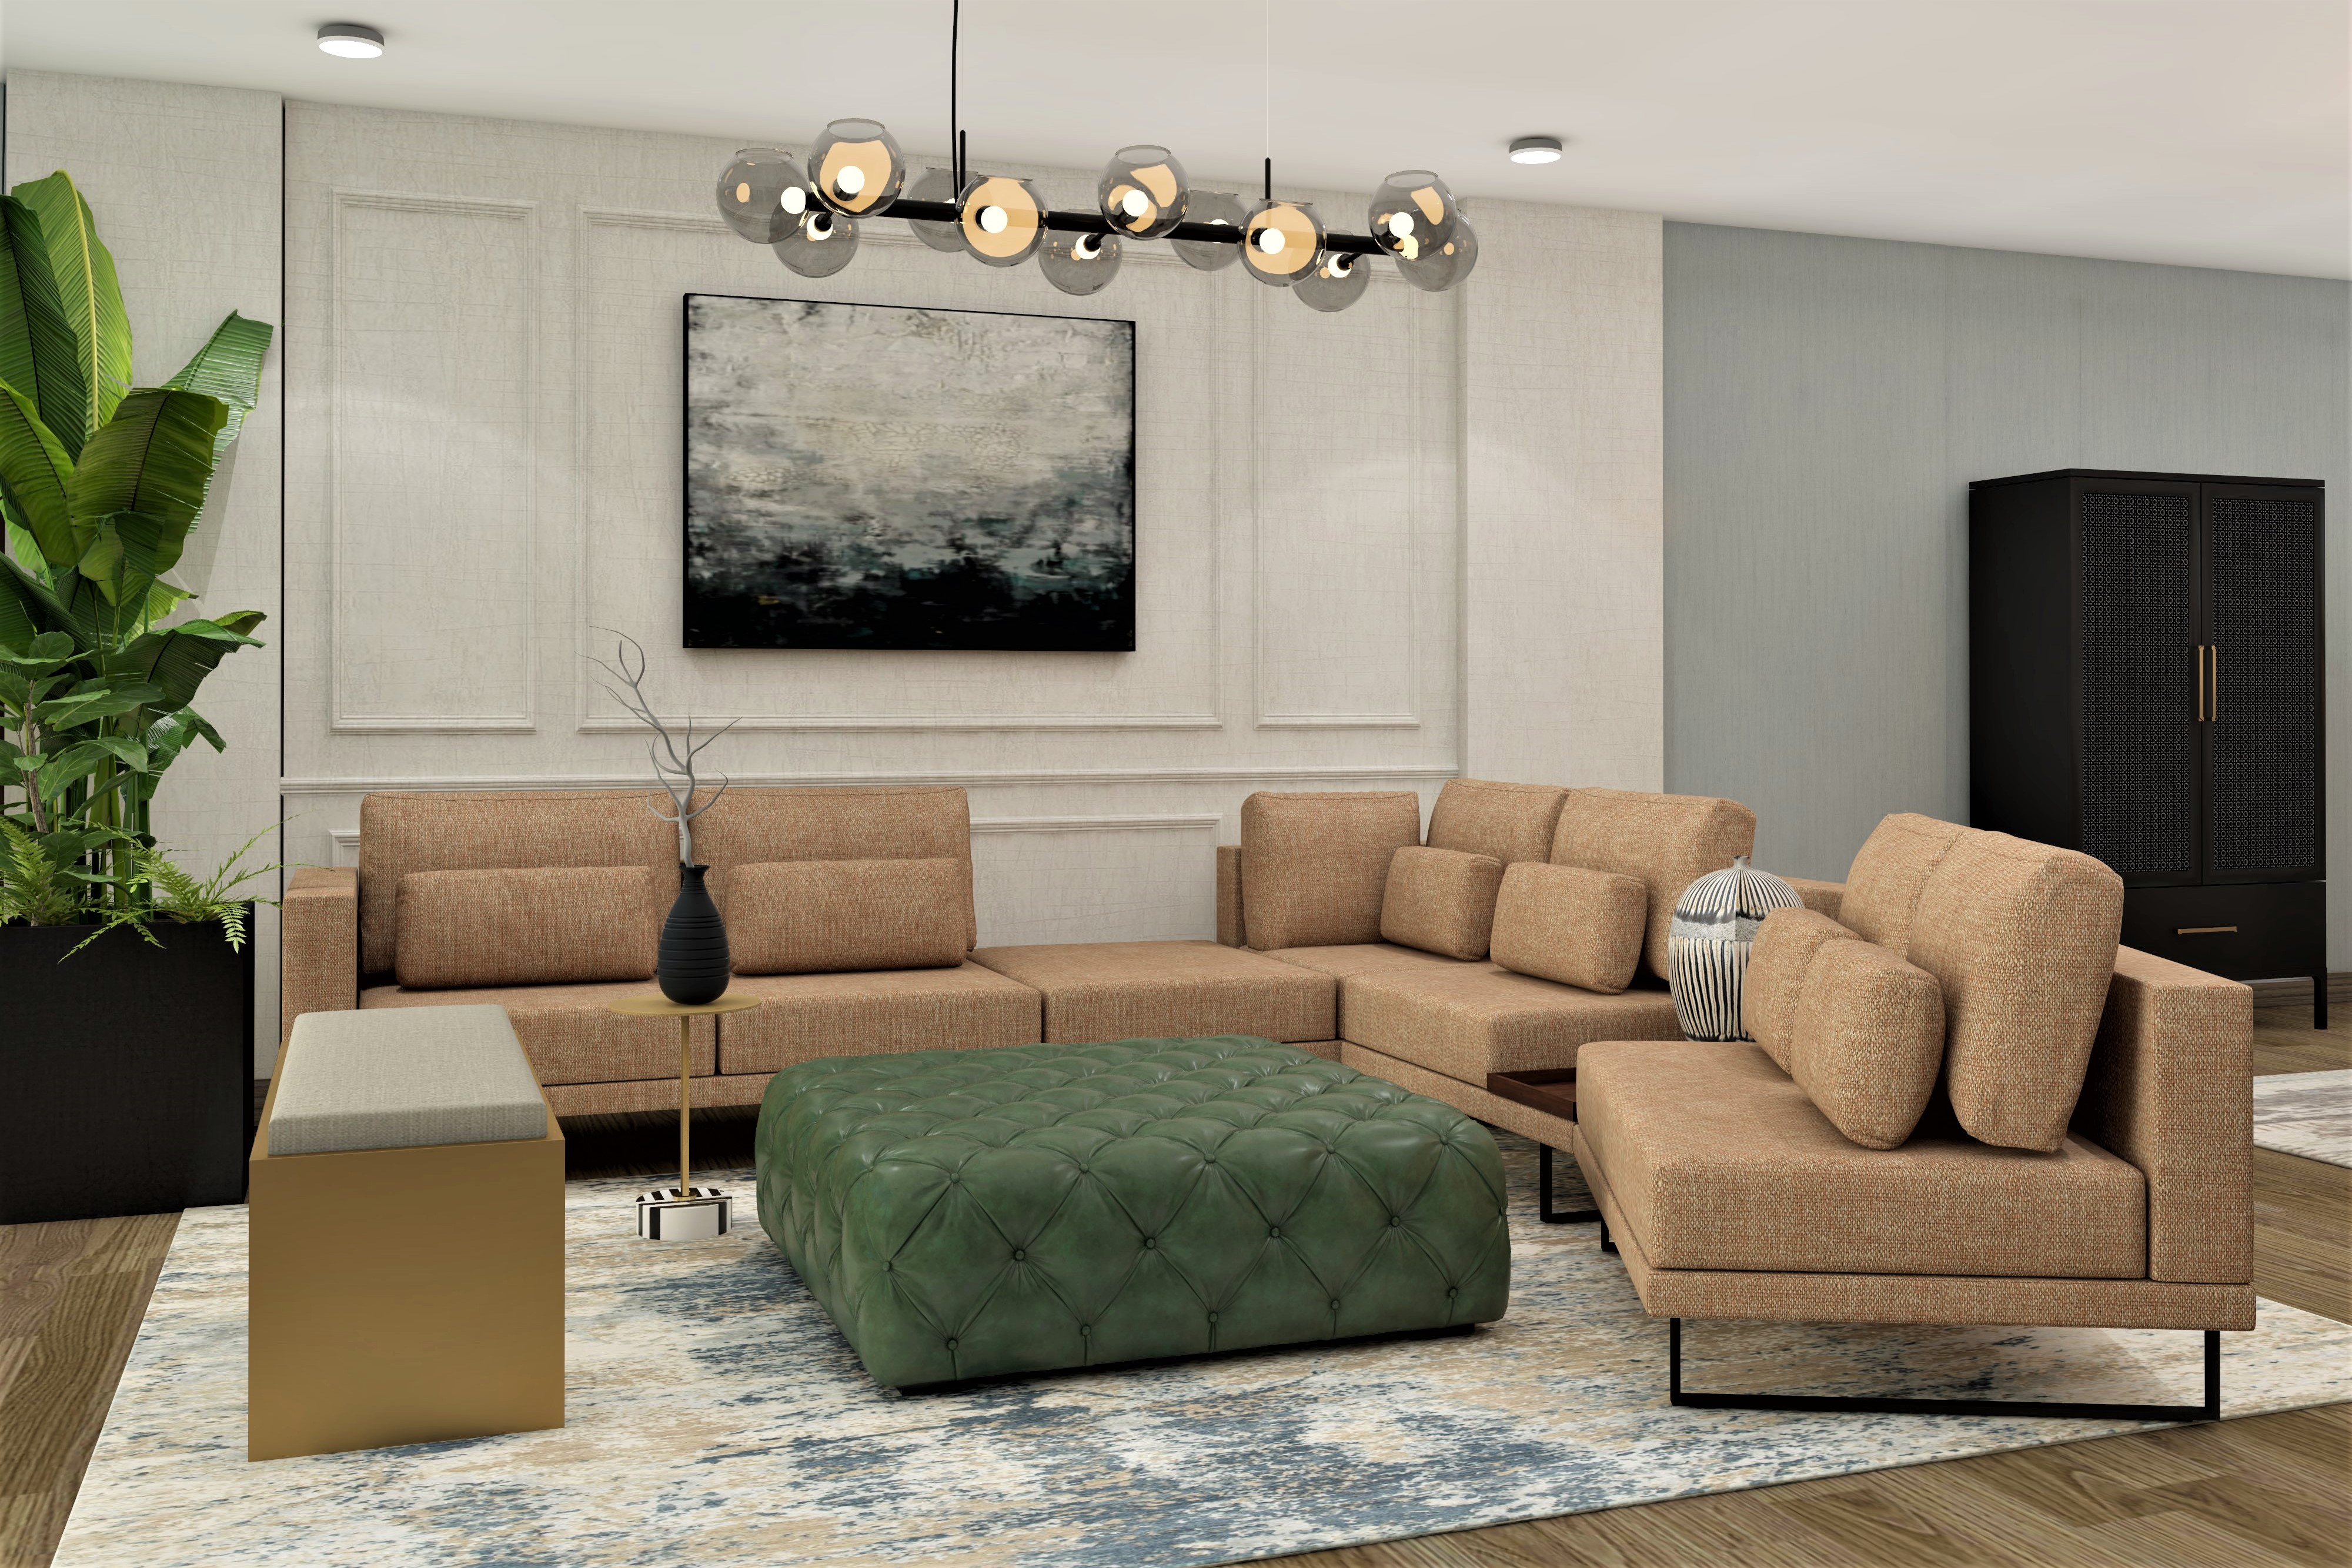 Living room with beige sofa and white wall paneling-Beautiful Homes